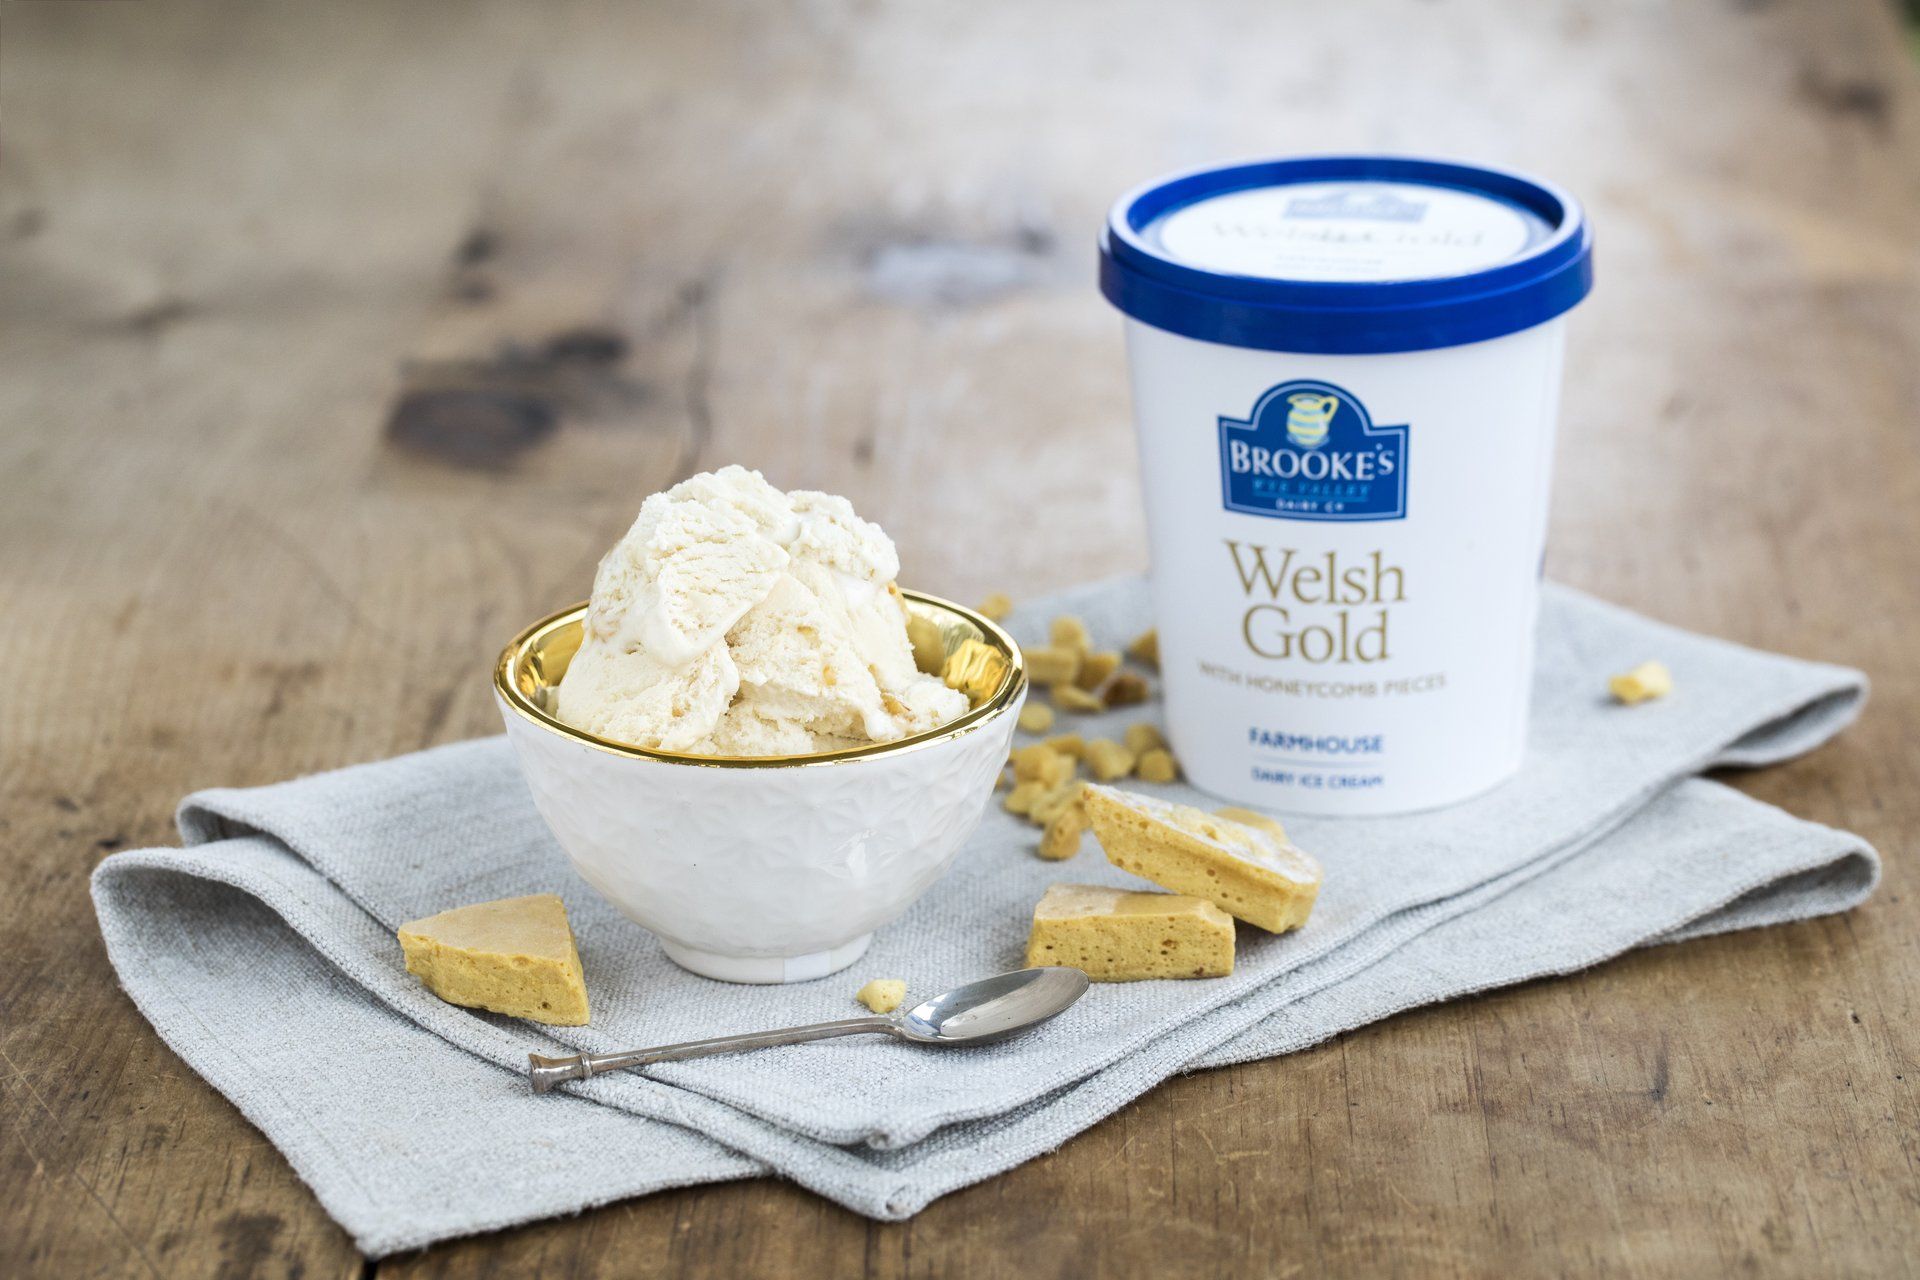 Brooke's Dairy Welsh Gold Welsh ice cream